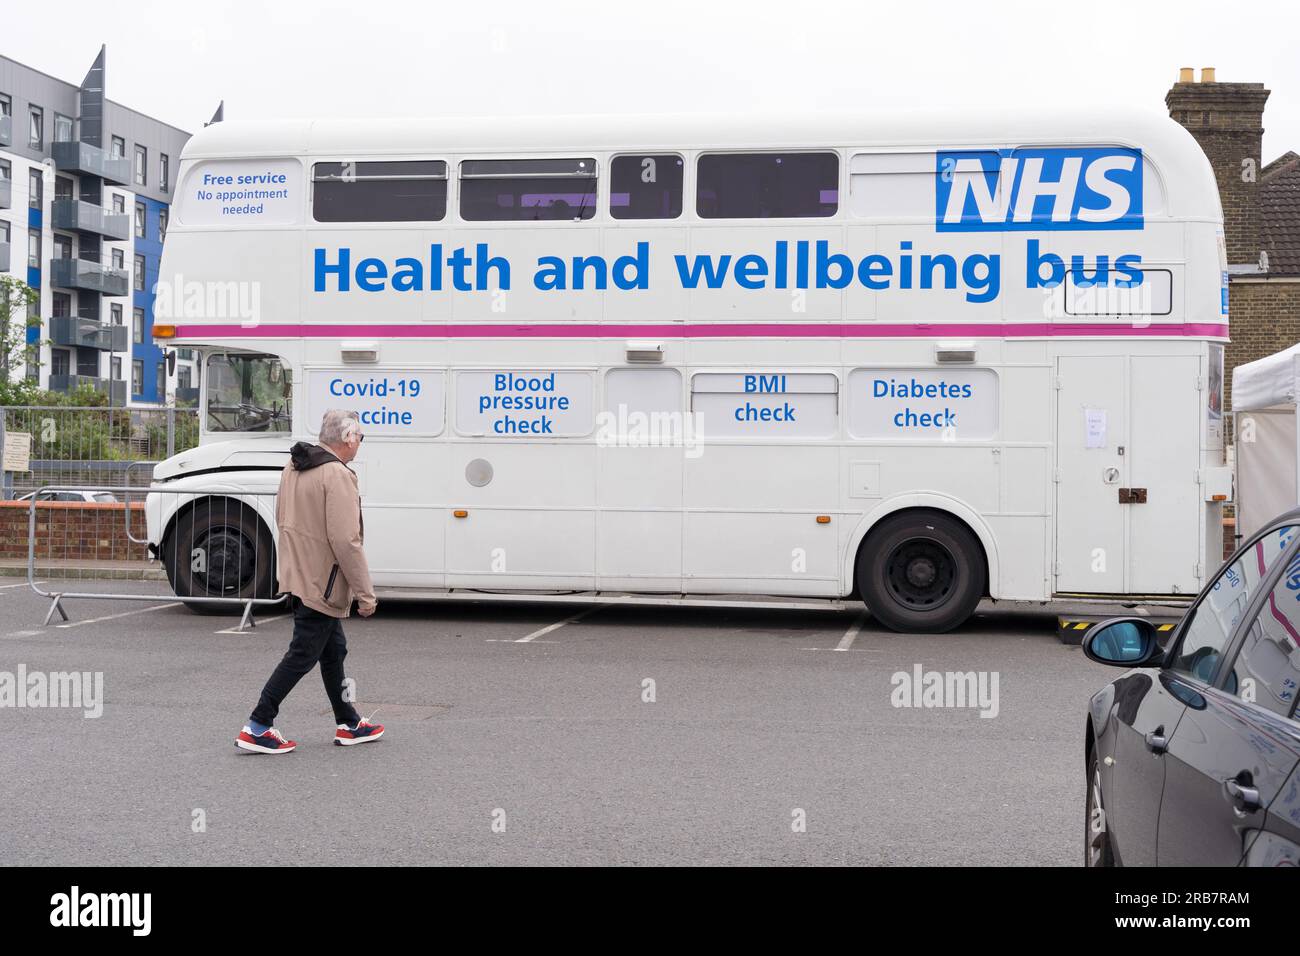 A man walks to NHS bus offering Health and Wellbeing services, Kent England UK Stock Photo